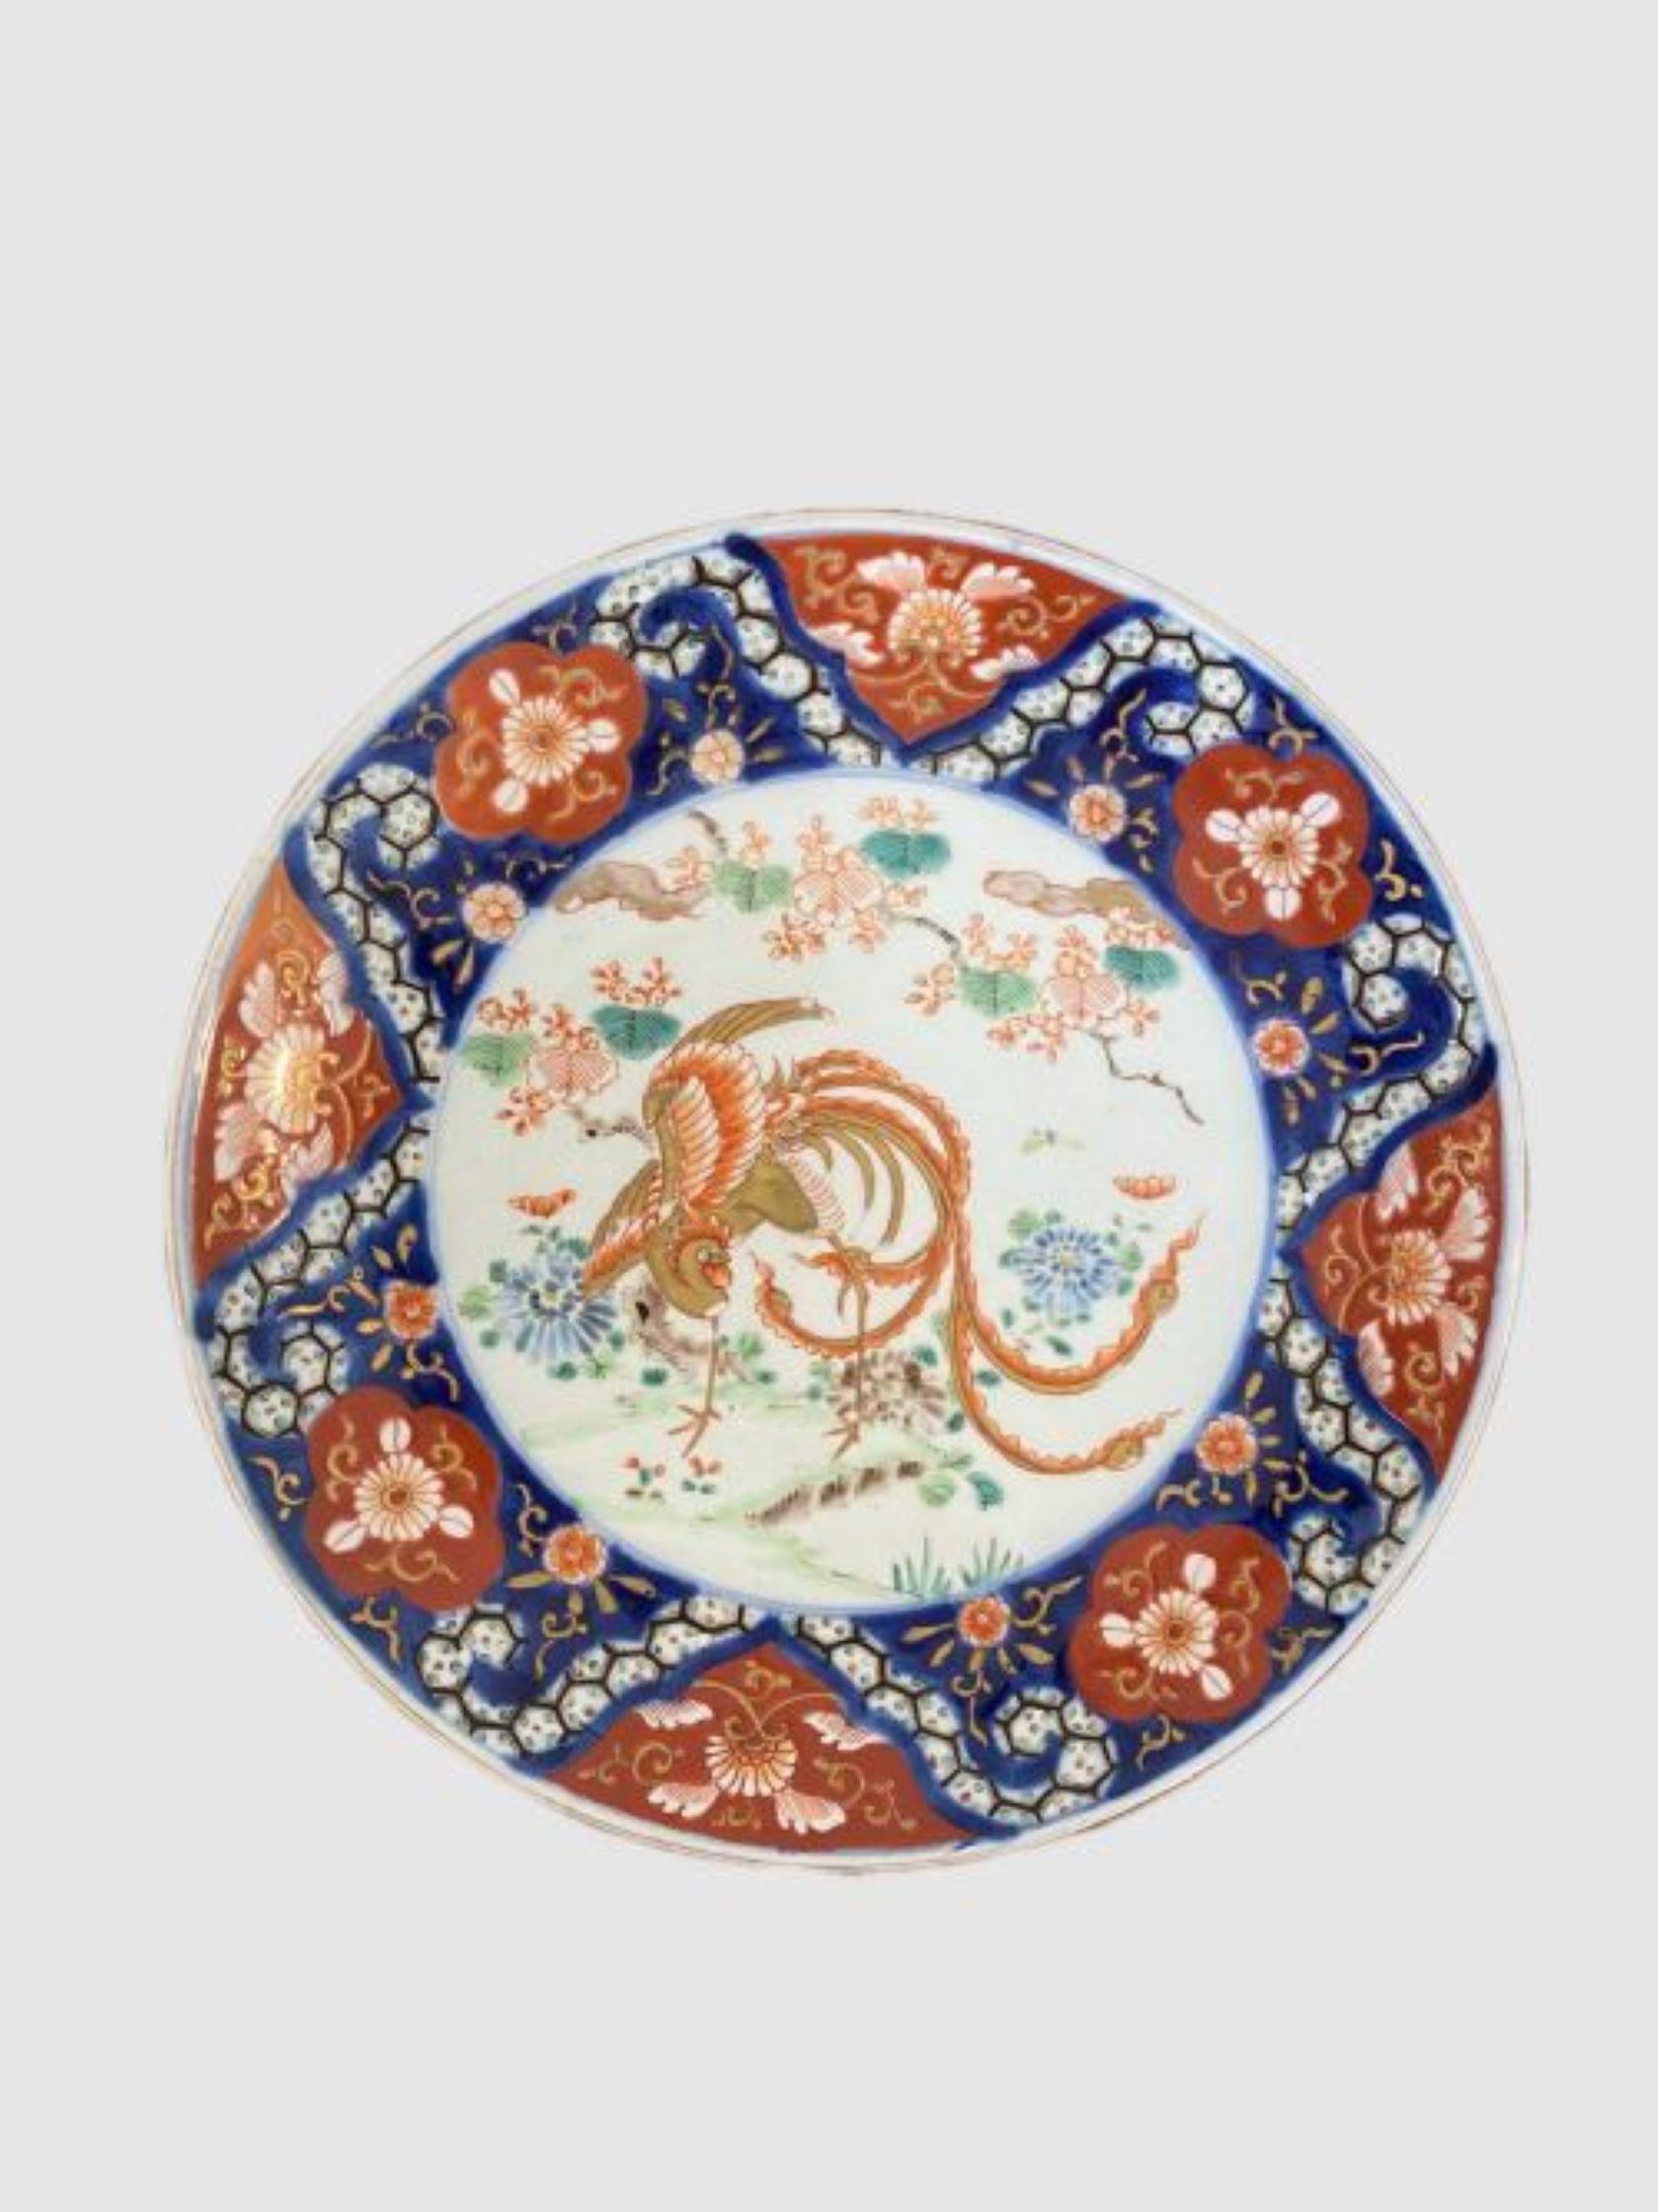 Quality antique Japanese imari plate having a quality hand painted imari plate with flowers, leaves, trees and an unusual large decorated bird to the centre in wonderful red, blue, green, white and gold colours.